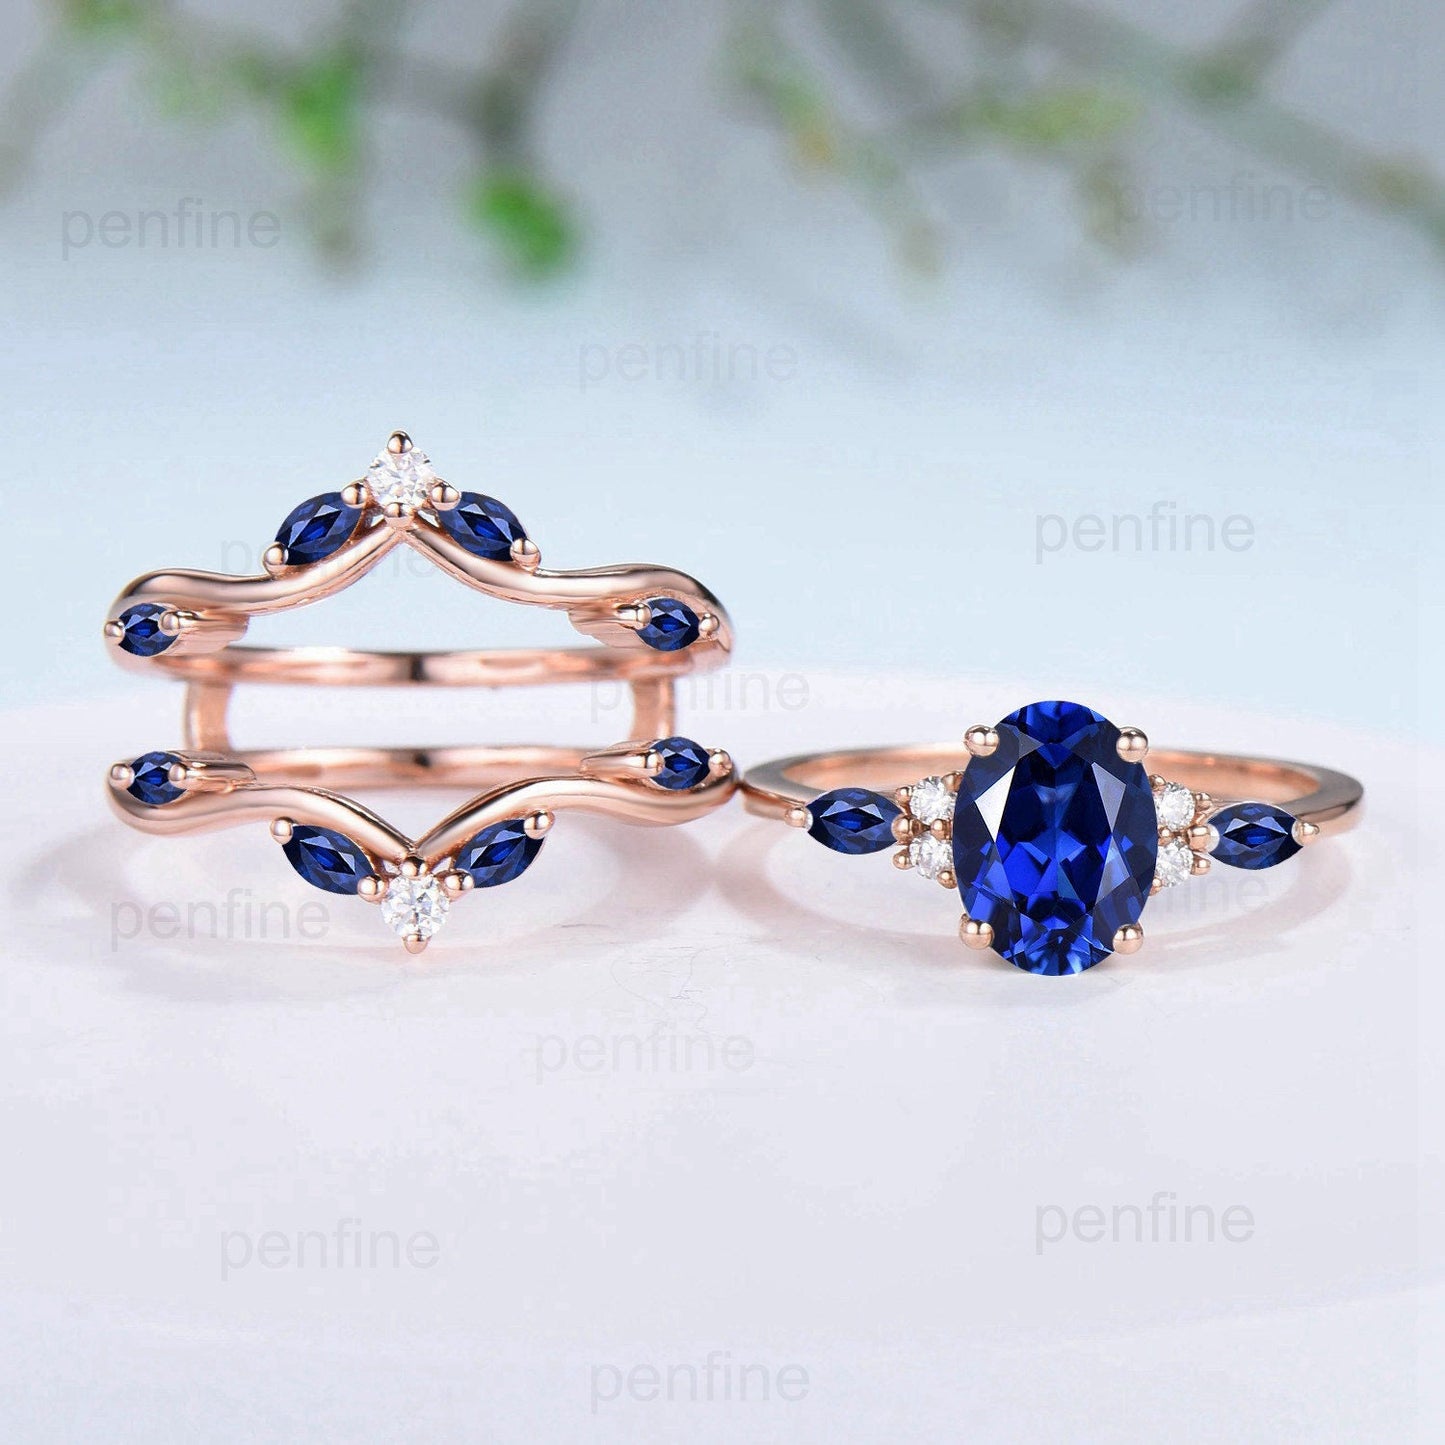 Unique Oval Sapphire Engagement Ring Set Vintage Marquise Lab Sapphire Wedding Ring Double Curved Enhancer Moissanite Stacking Bridal Set - PENFINE